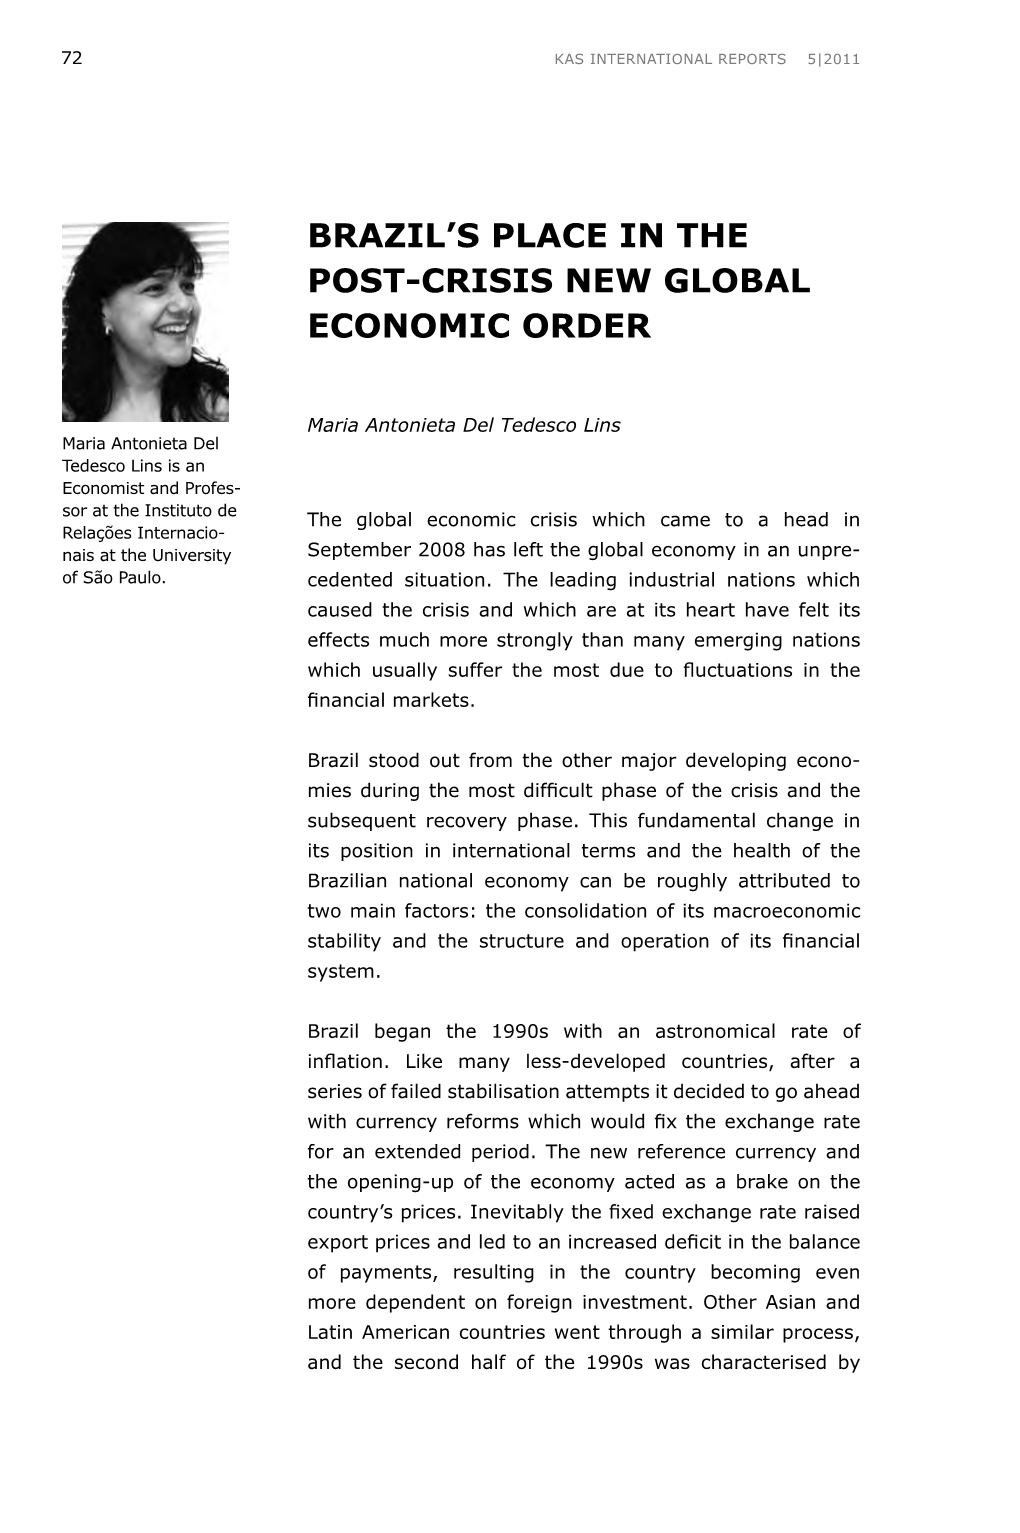 Brazil´S Place in the Post-Crisis New Global Economic Order